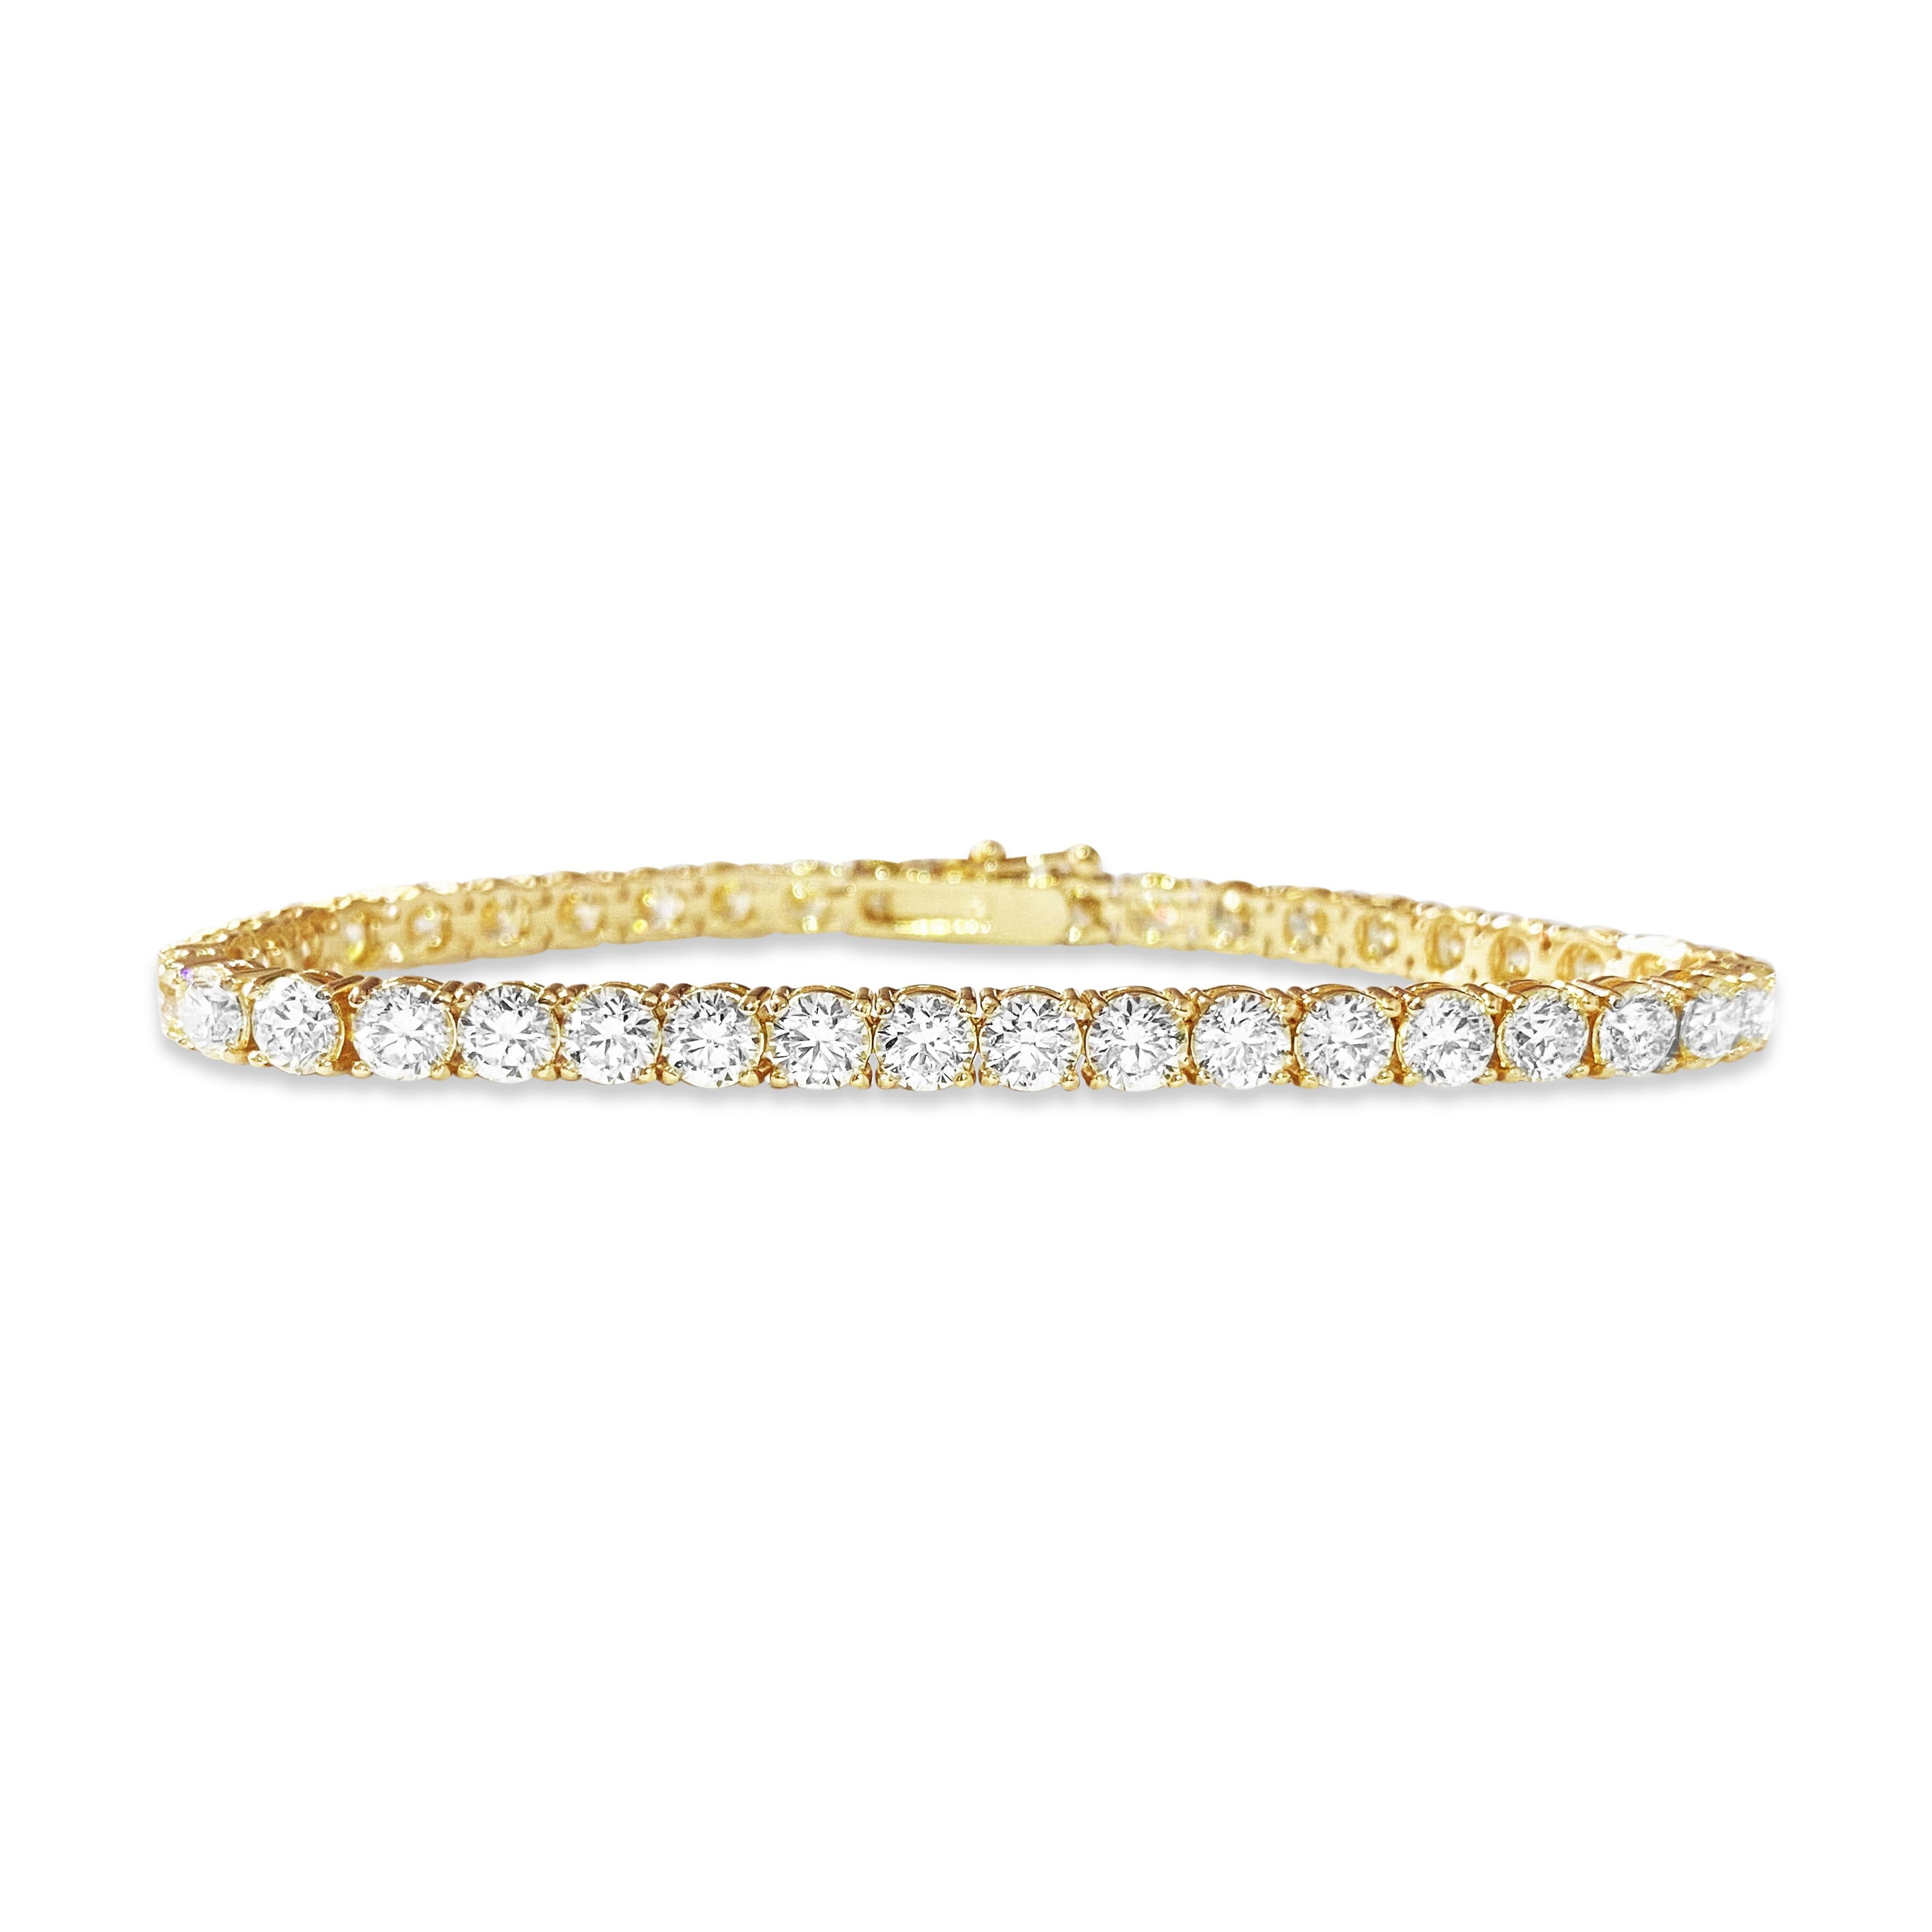 Step into elegance with our exquisite Diamond Tennis Bracelet, crafted from radiant yellow gold. Adorned with a stunning array of round brilliant cut diamonds, each boasting VVS clarity, this bracelet is a timeless symbol of luxury. Perfect for